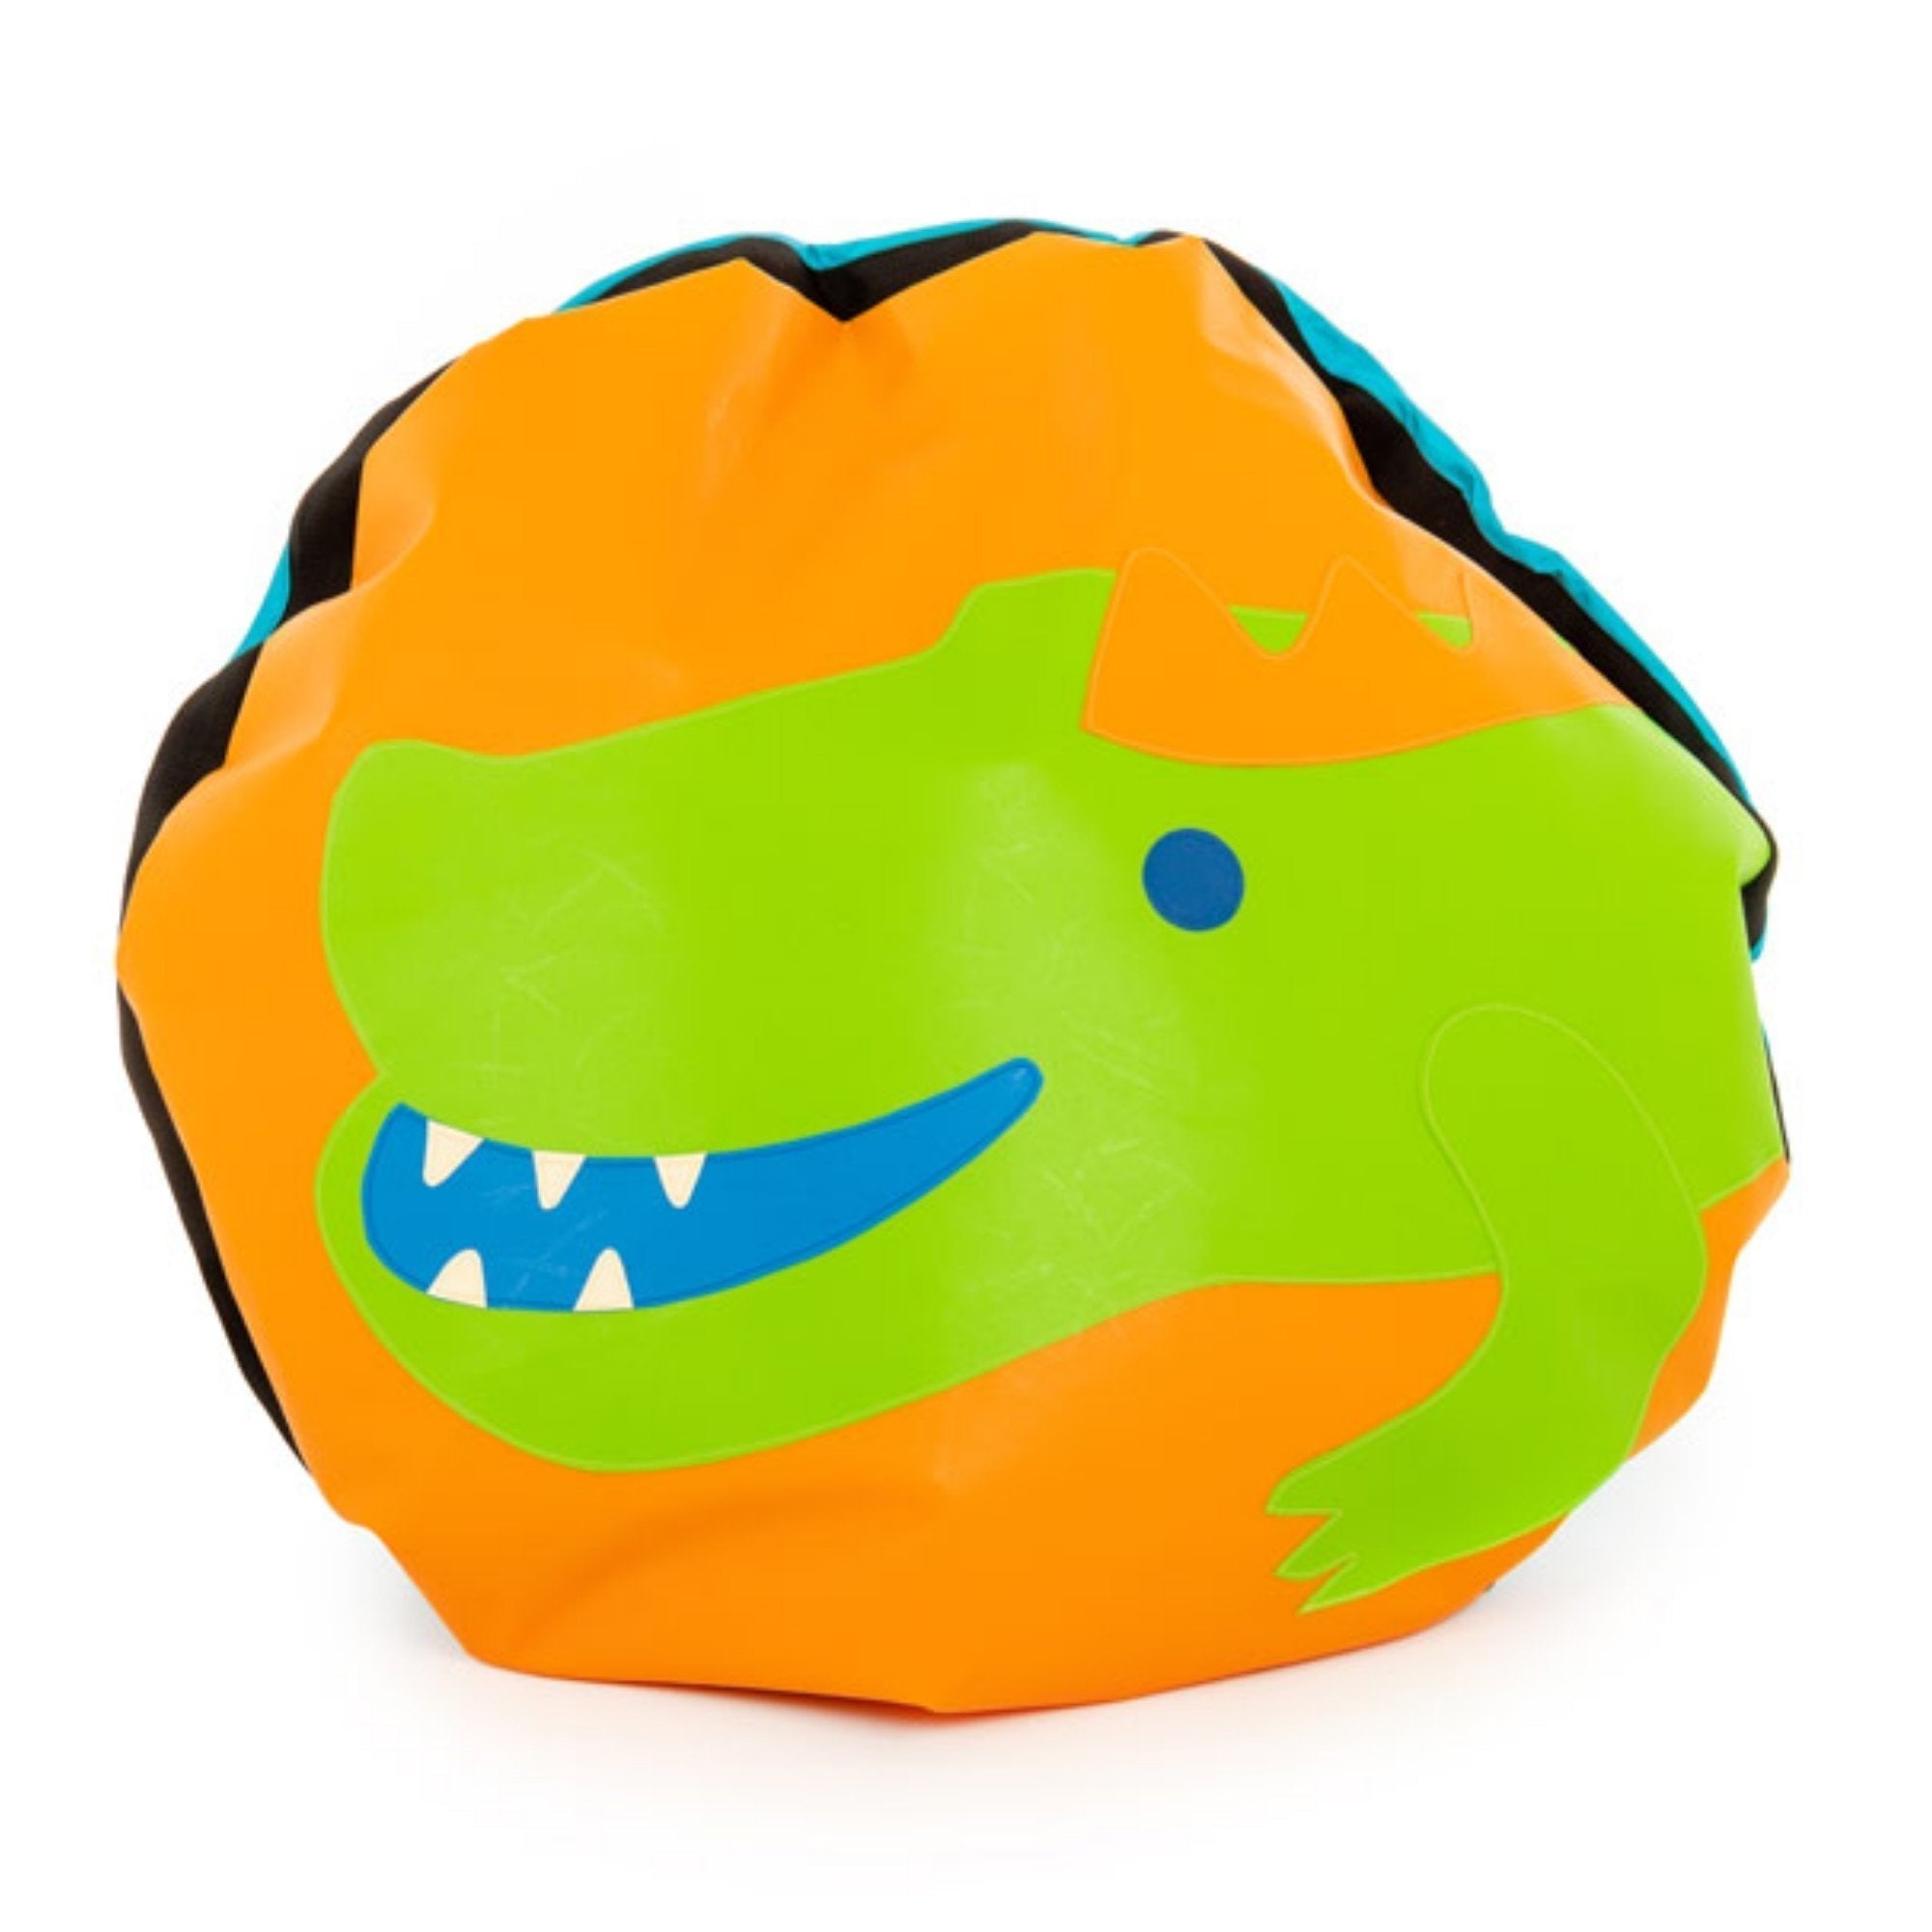 Crocodile Animal Bean Bag, Introducing the Crocodile Animal Bean Bag: Where Comfort Meets Creativity Transform any space into a cozy, imaginative oasis with our Crocodile Animal Bean Bag. Designed for all-around seating in nurseries, bedrooms, or Early Years Foundation Stage (EYFS) settings, this lovable crocodile-inspired bean bag is more than just a comfortable place to sit—it's an educational and colorful addition to any room. Key Features: Educational Design: Our Crocodile Animal Bean Bag doesn't just p